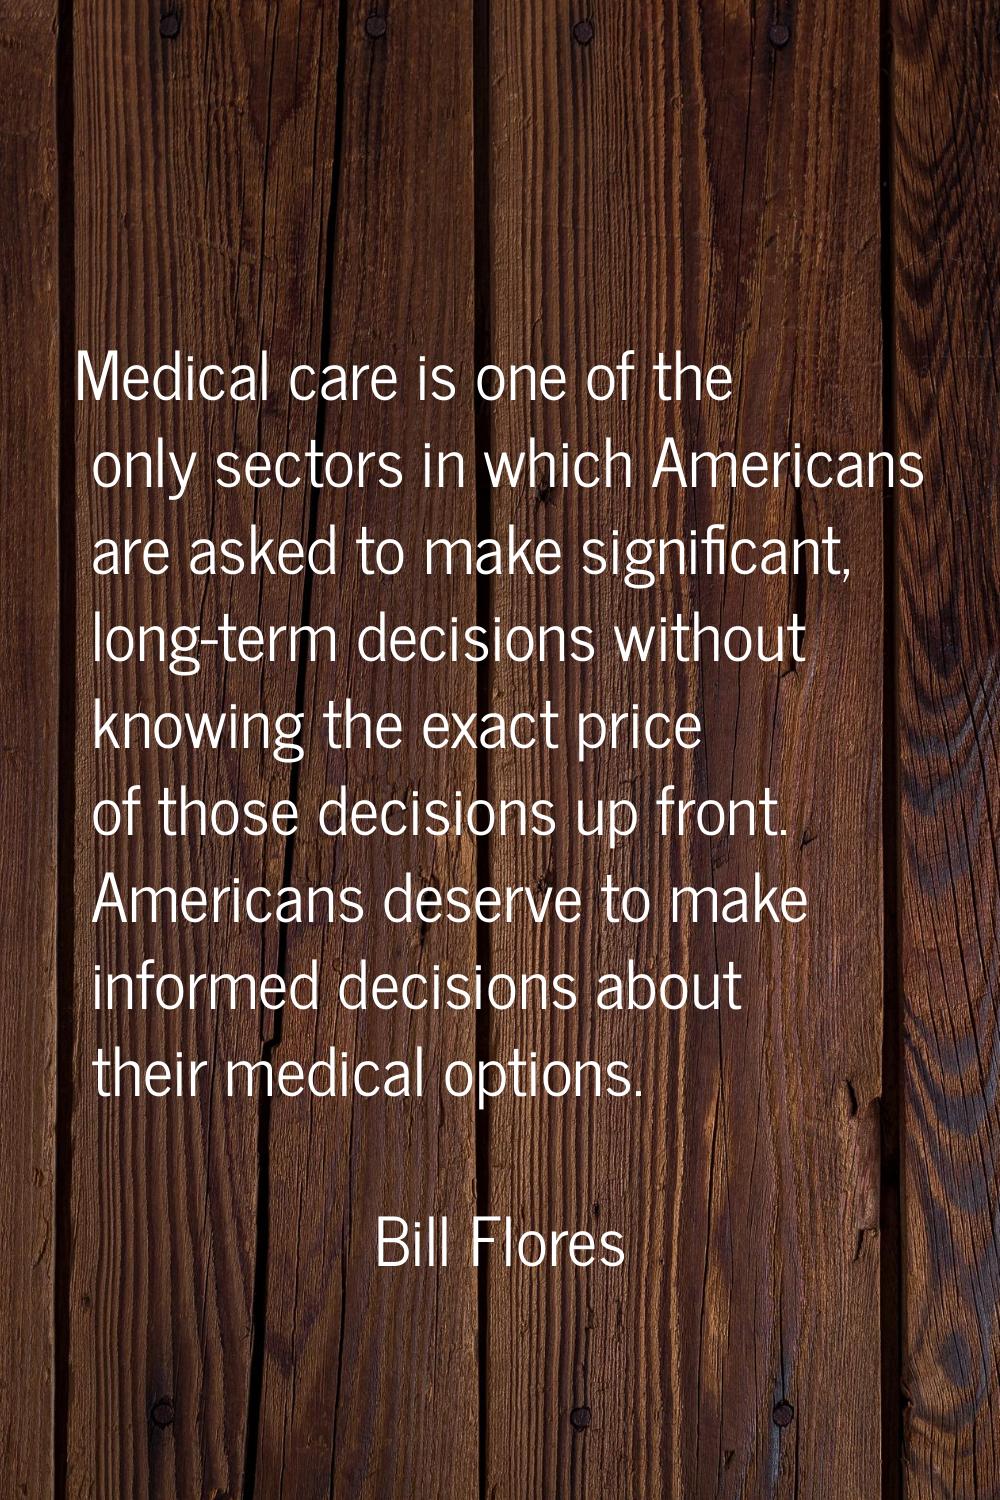 Medical care is one of the only sectors in which Americans are asked to make significant, long-term